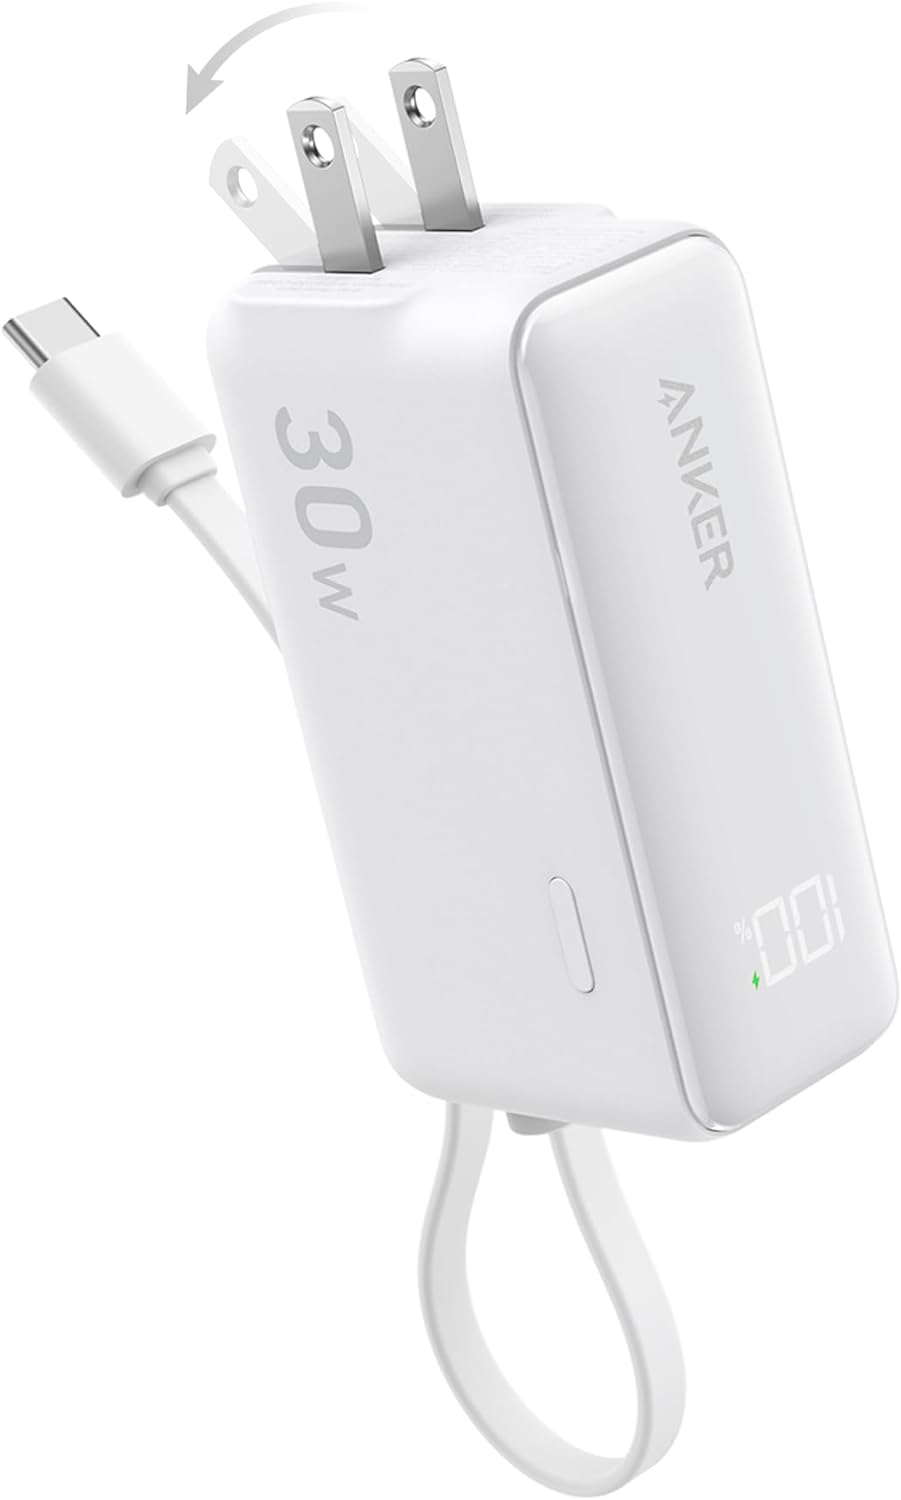 Anker 5,000mAh USB C Power Bank w/ Built-in USB-C Cable and Foldable AC Plug (30W Max) $27 + Free Shipping w/ Prime or orders $35+